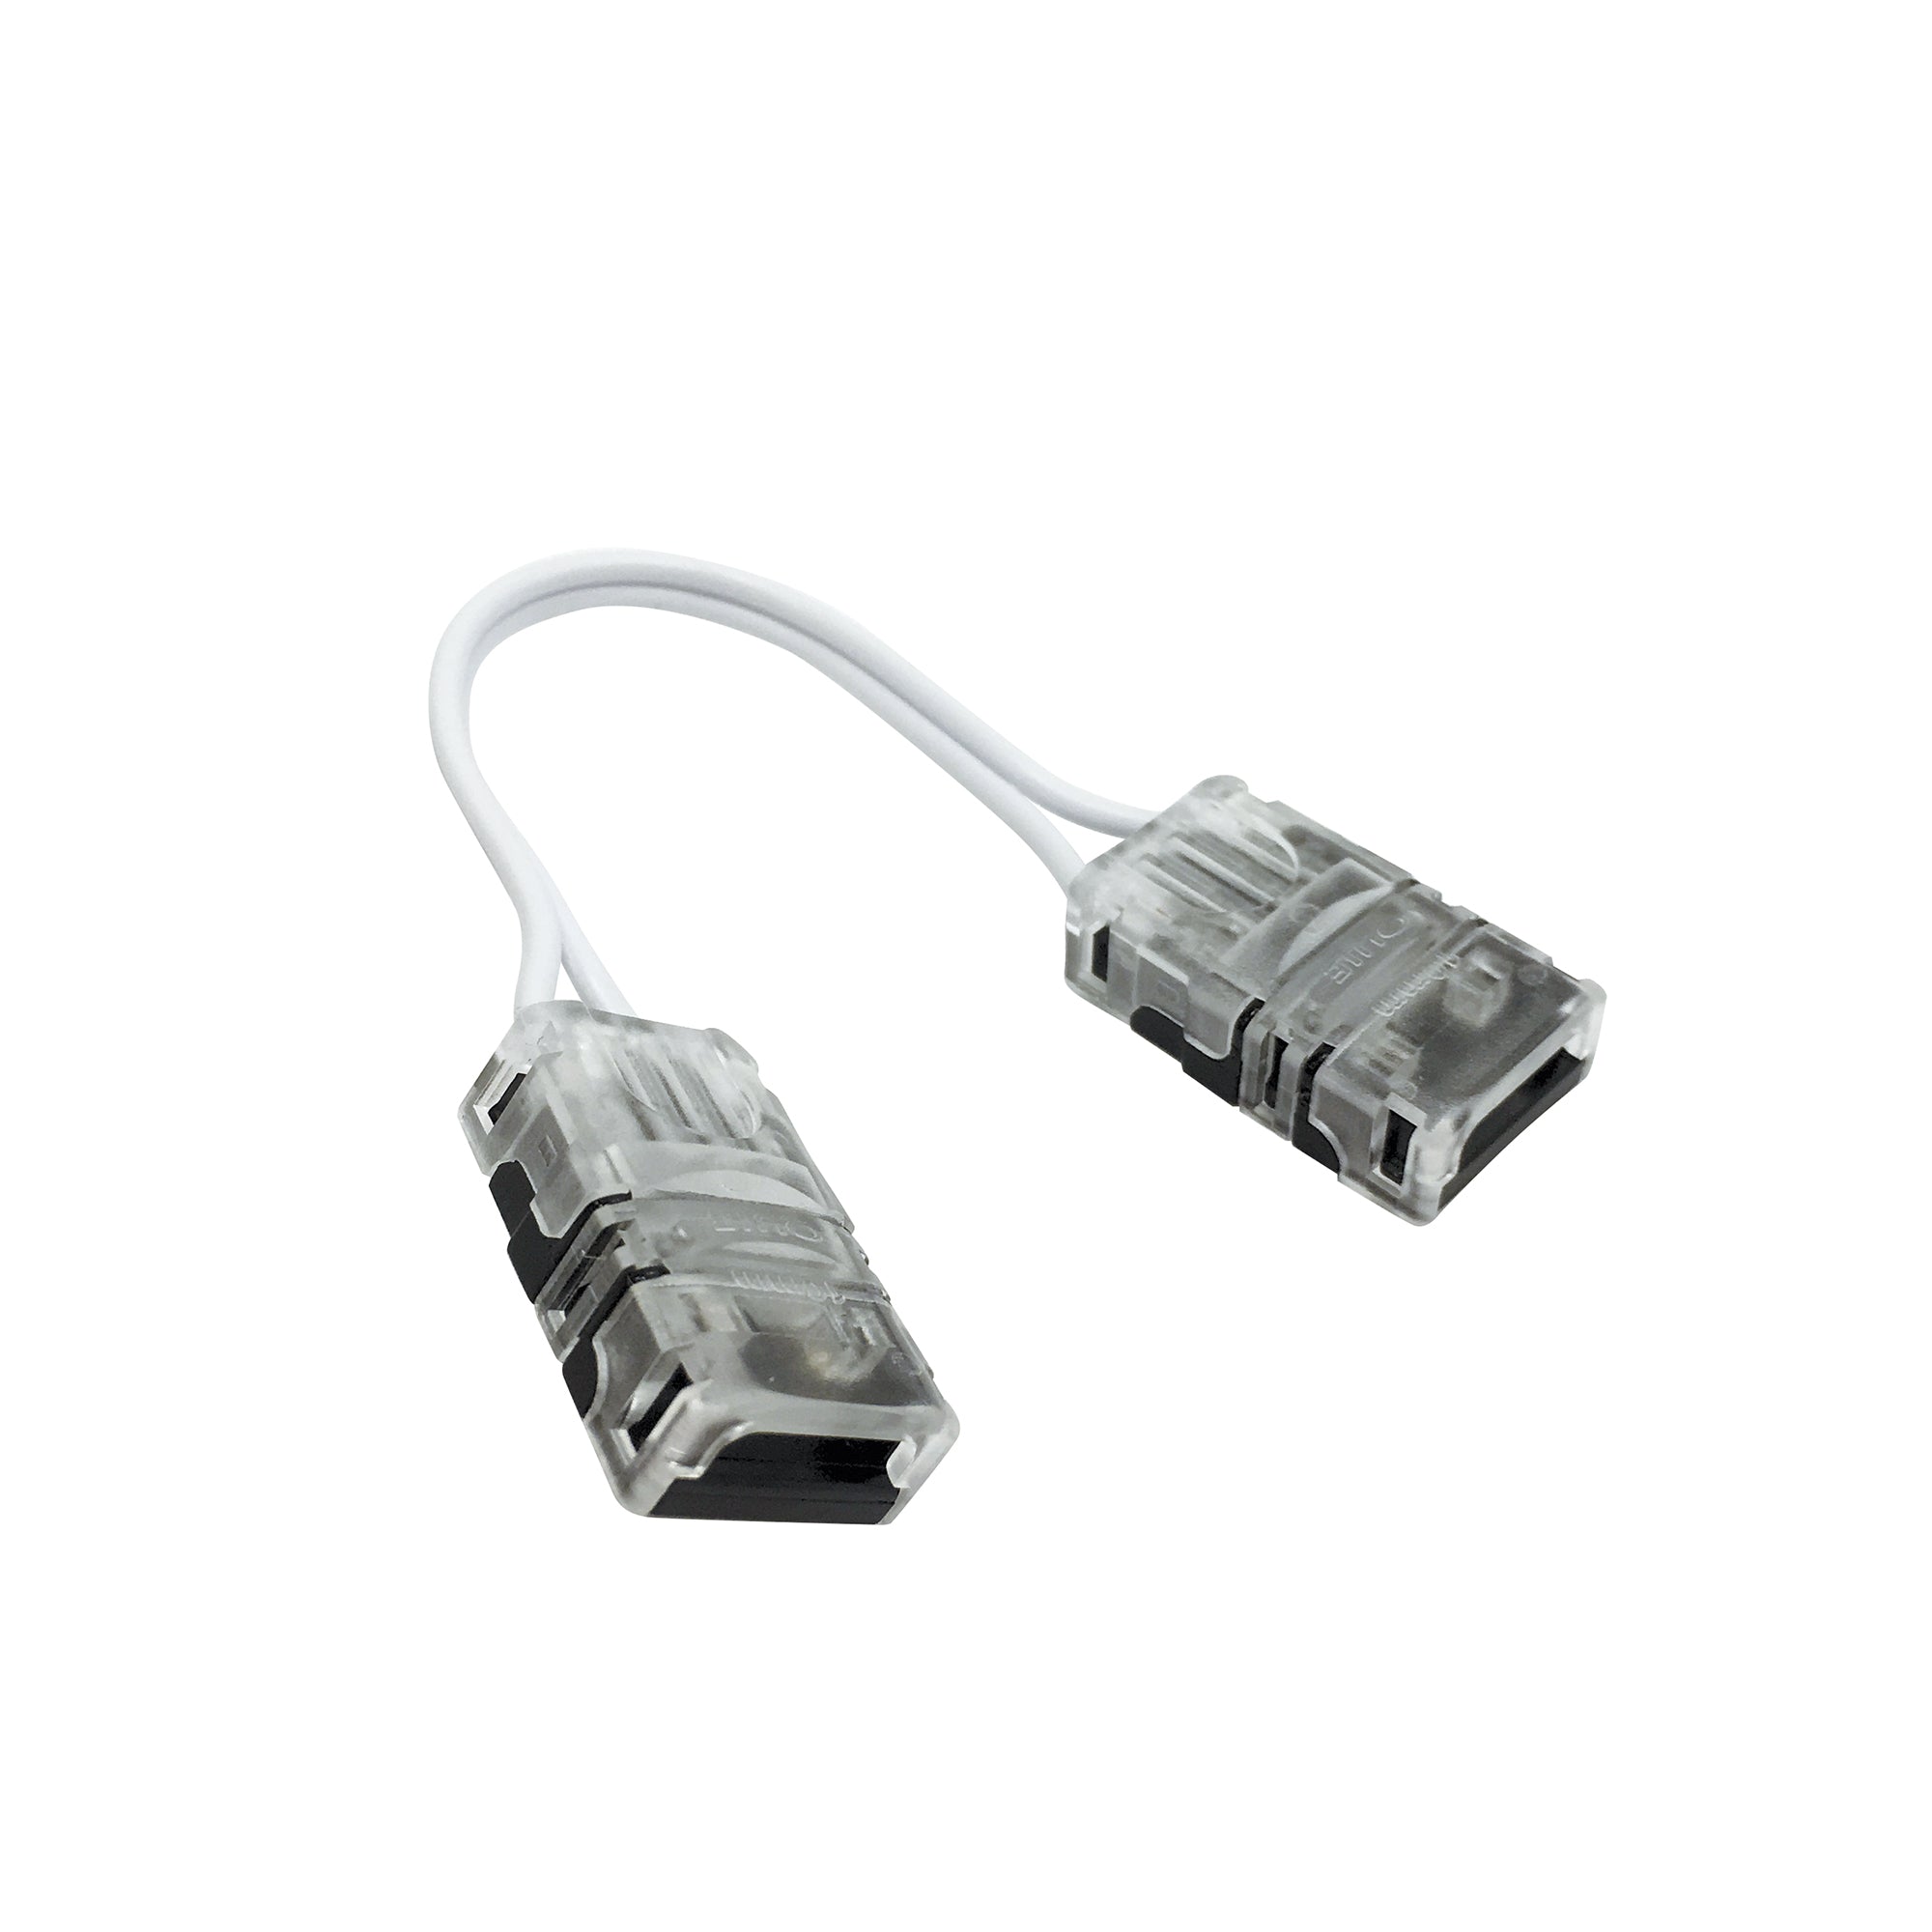 Nora Lighting NATLCD-203 3" Interconnection Cable For NUTP12 Comfort Dim Tape Light - White